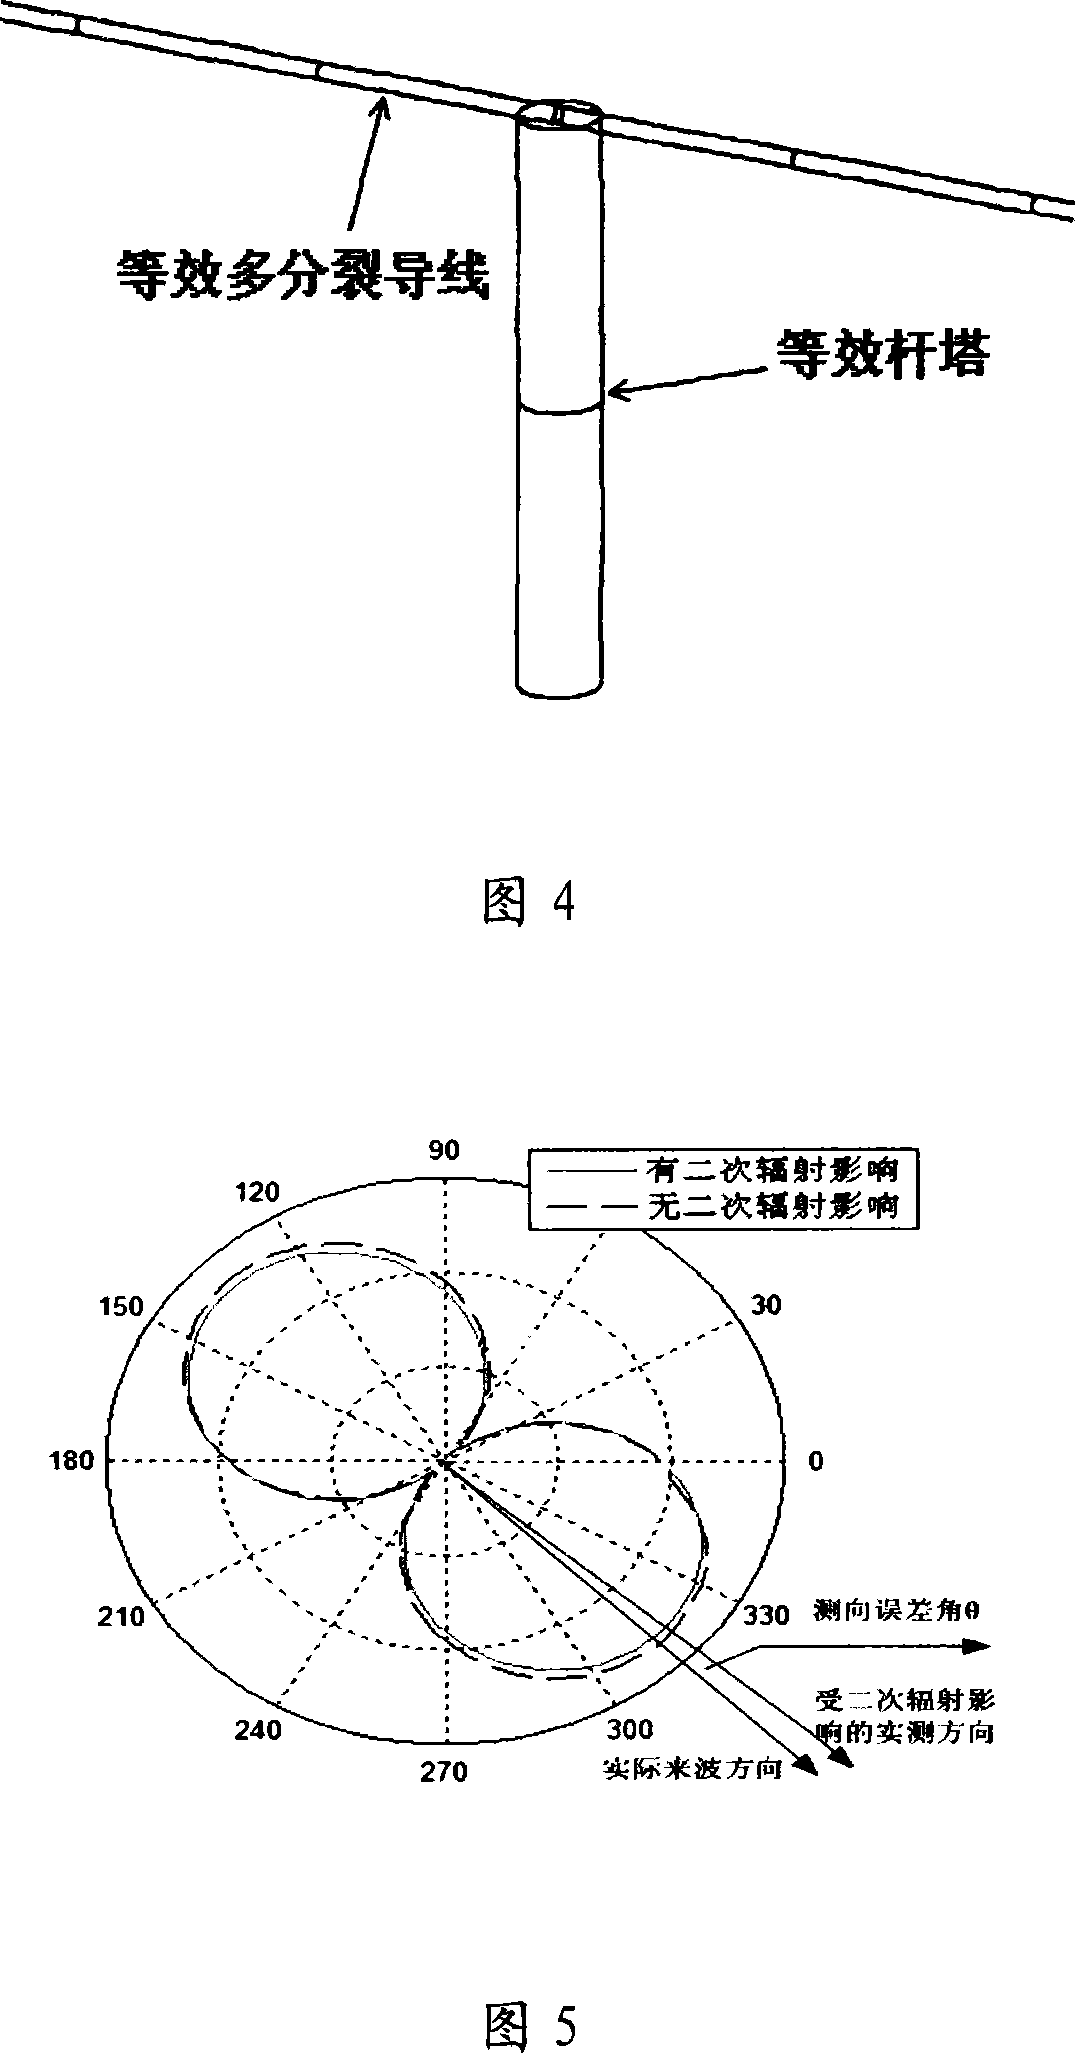 Method for confirming protection distance between extra-high voltage alternating current line and medium wave navigation station